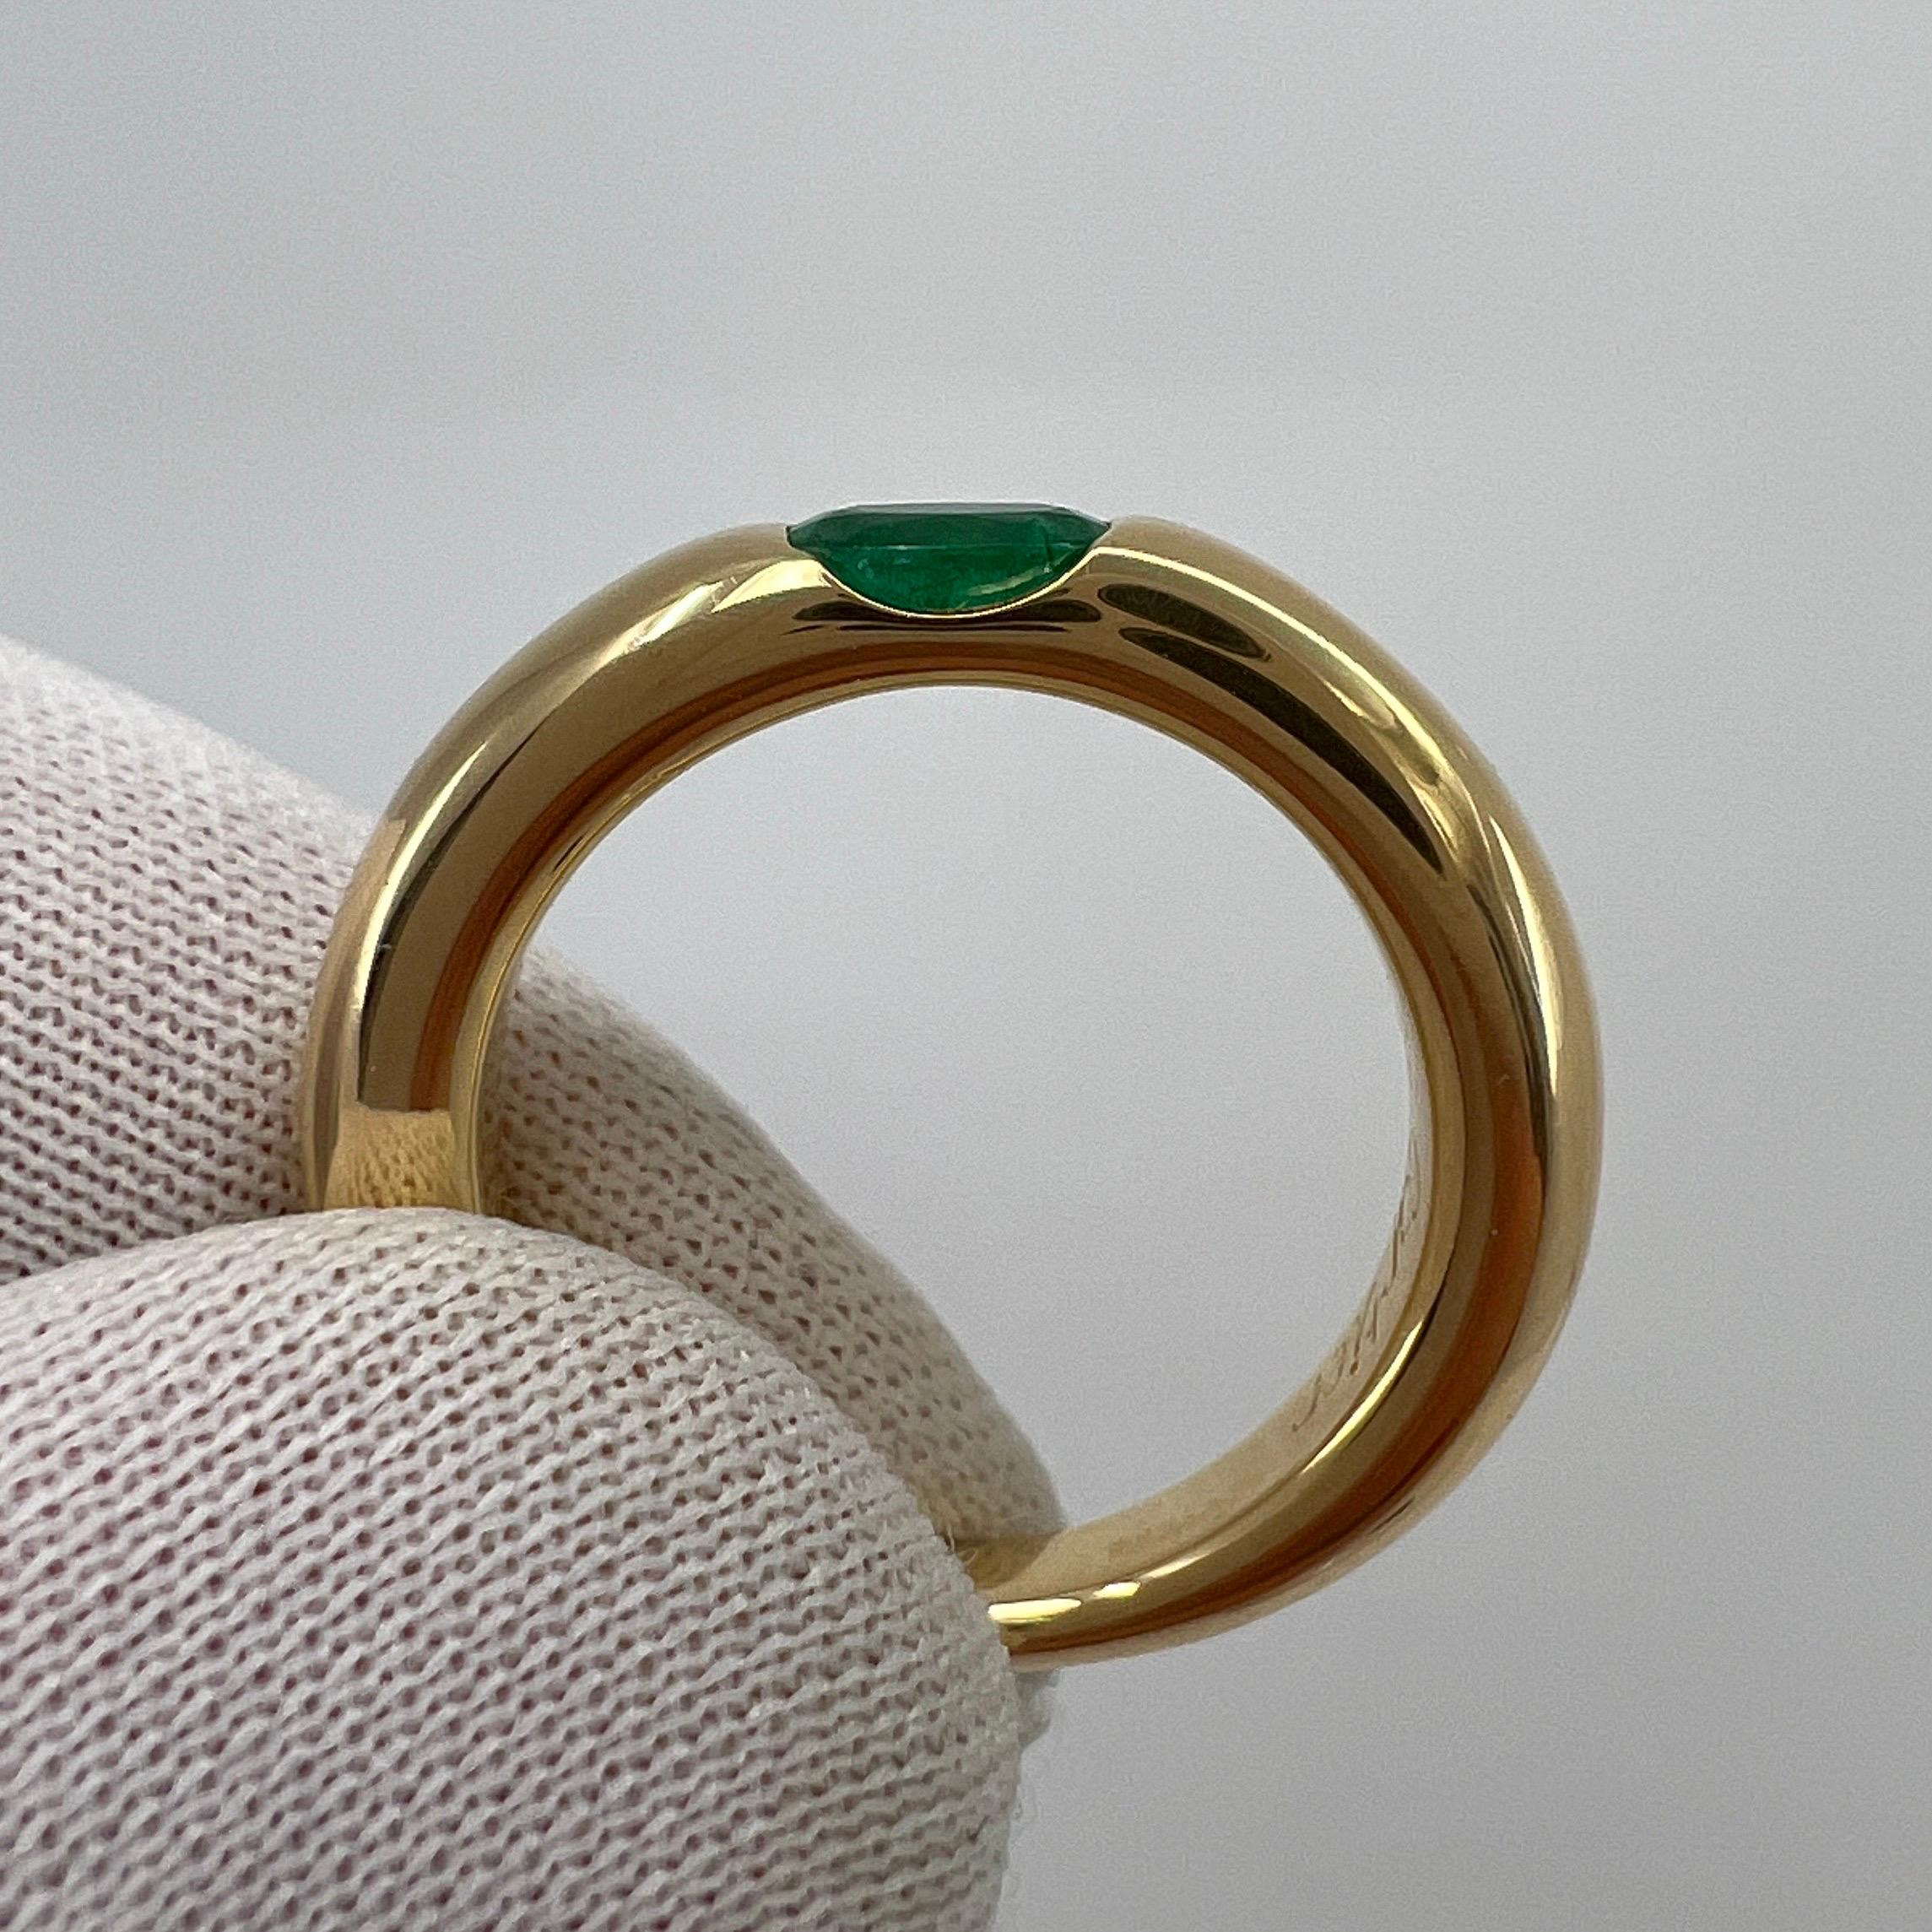 Vintage Cartier Vivid Green Emerald Ellipse 18k Yellow Gold Solitaire Ring 4